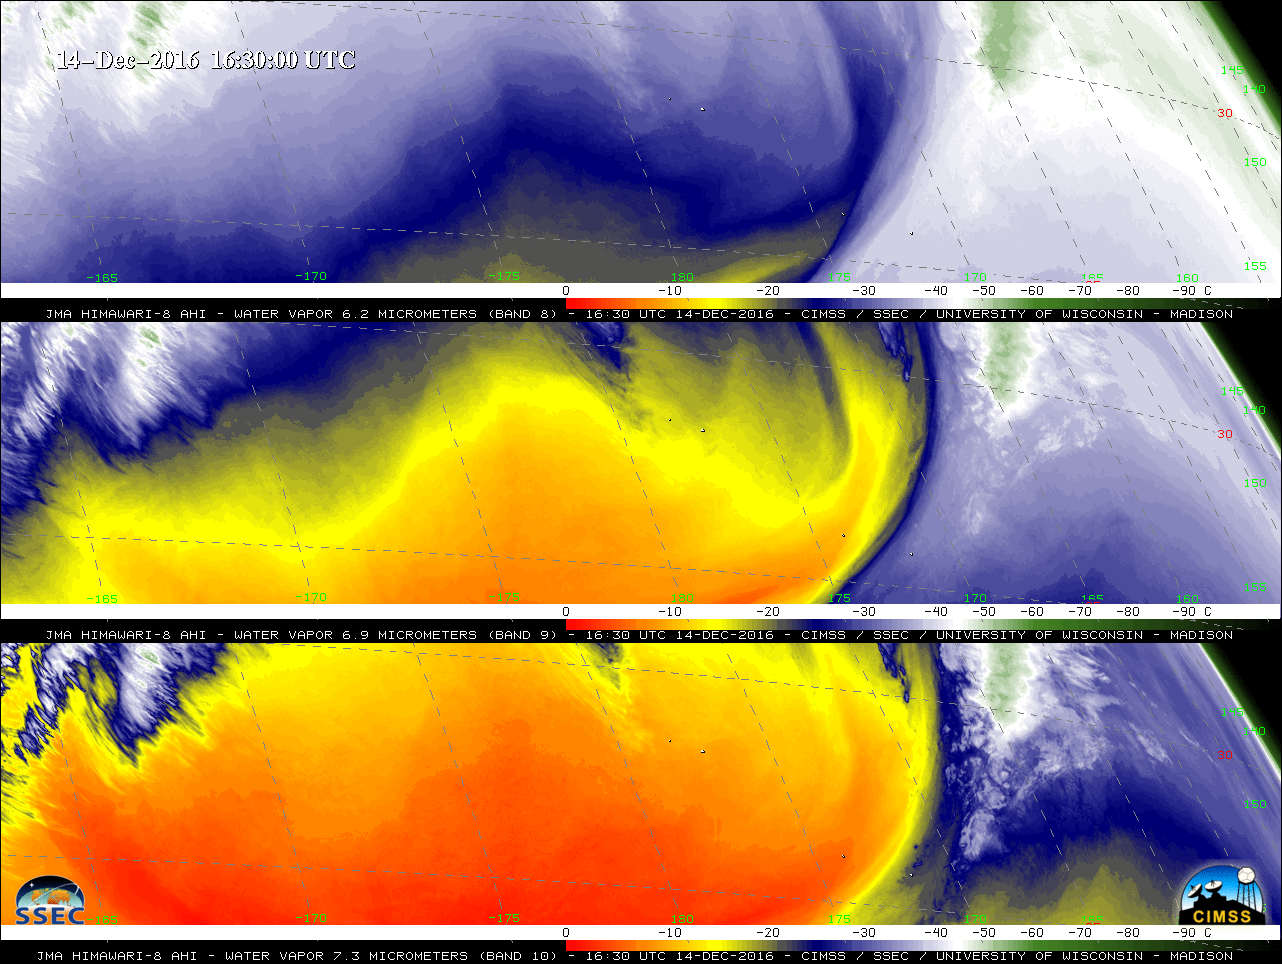 Himawari-8 Water Vapor (6.2 µm, top; 6.9 µm, middle; 7.4 µm, bottom) images [click to play animation]